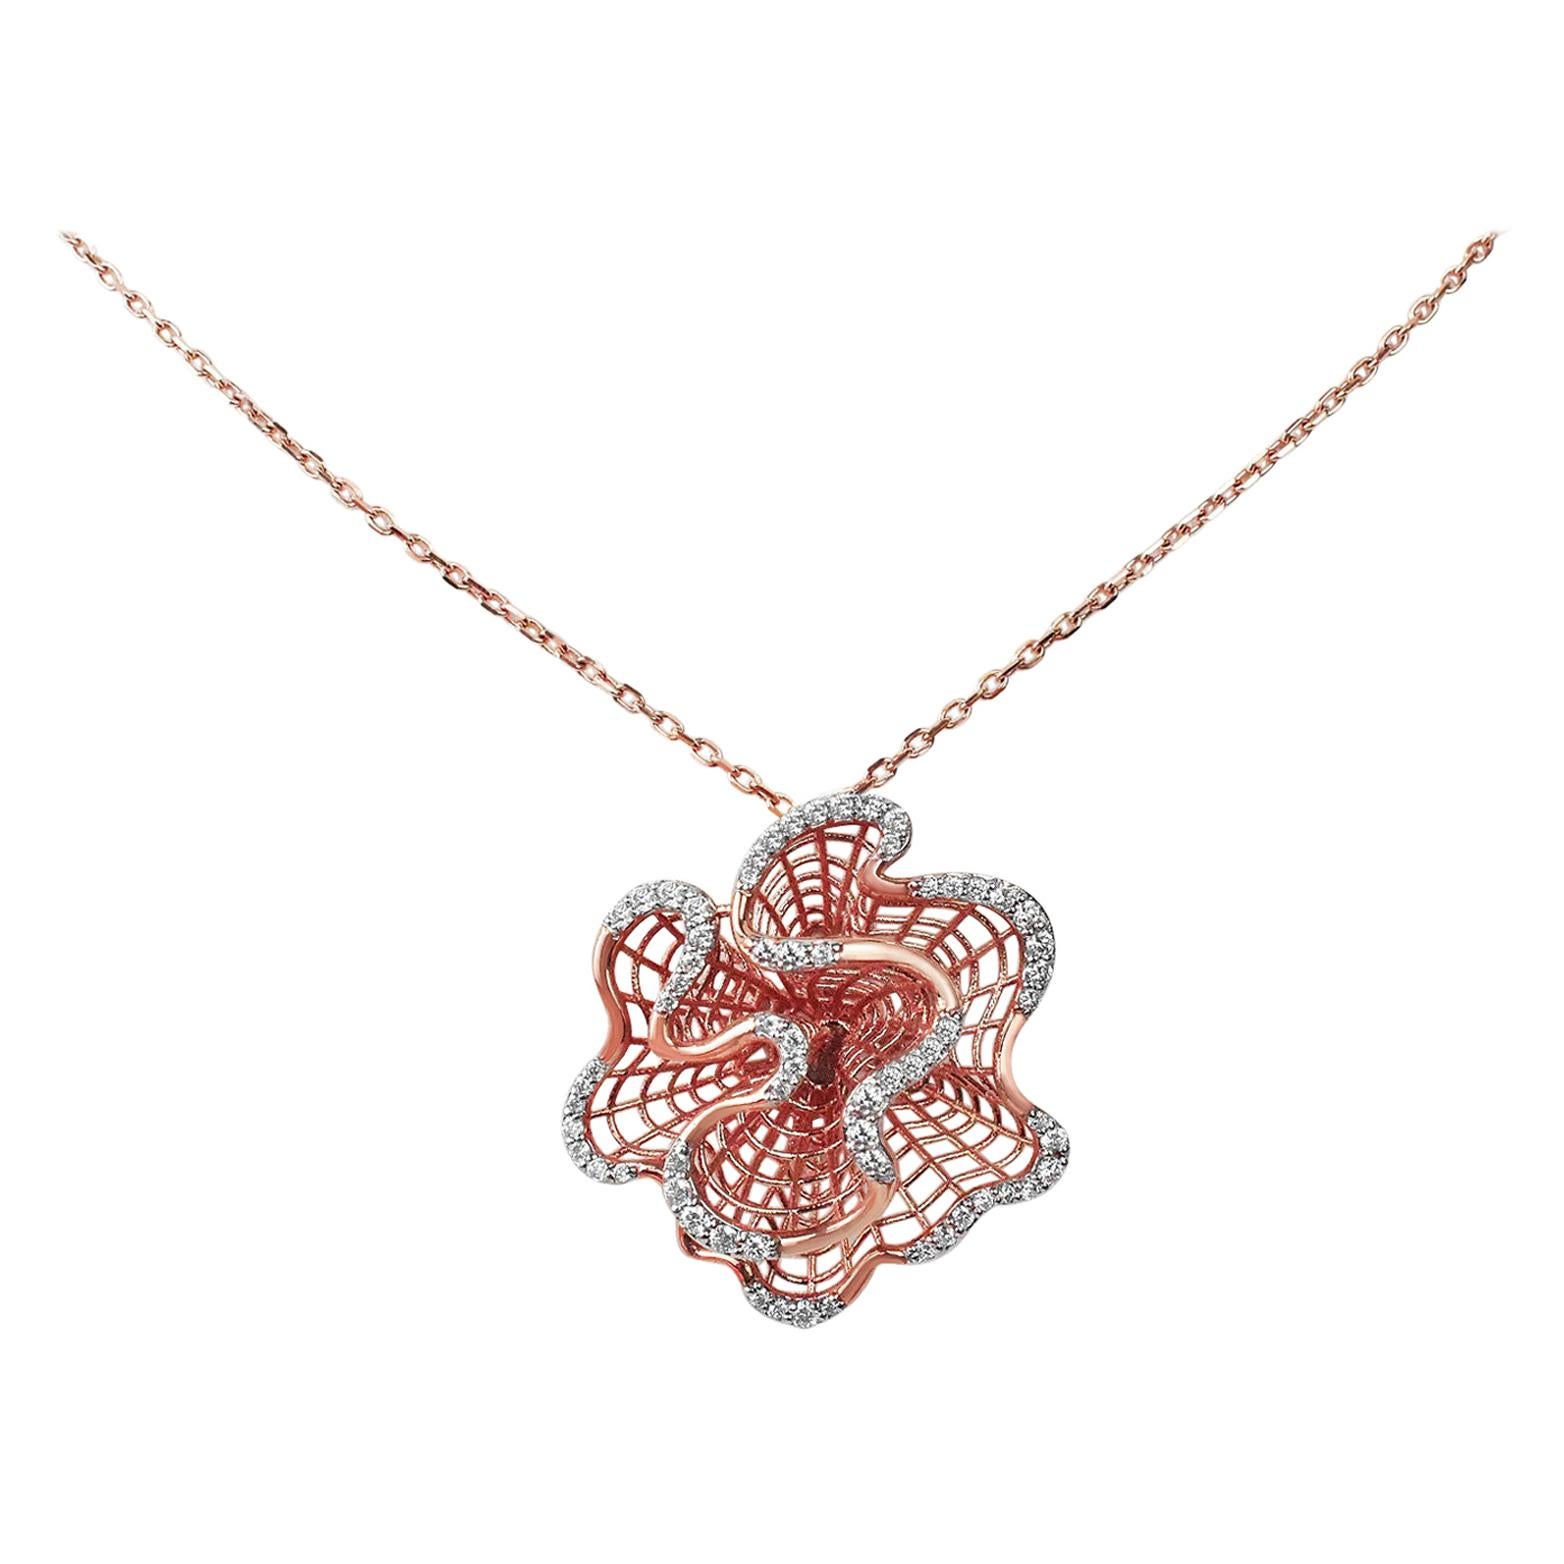 18Karat Gold Pendant Necklace Two-Tone White Gold Rose Gold Diamond Pave Floral Fashion Pendant Necklace
          A fashion Art Nouveau floral open filigree pendant necklace meticulously crafted to mesmerize. Each part of this art piece shows the